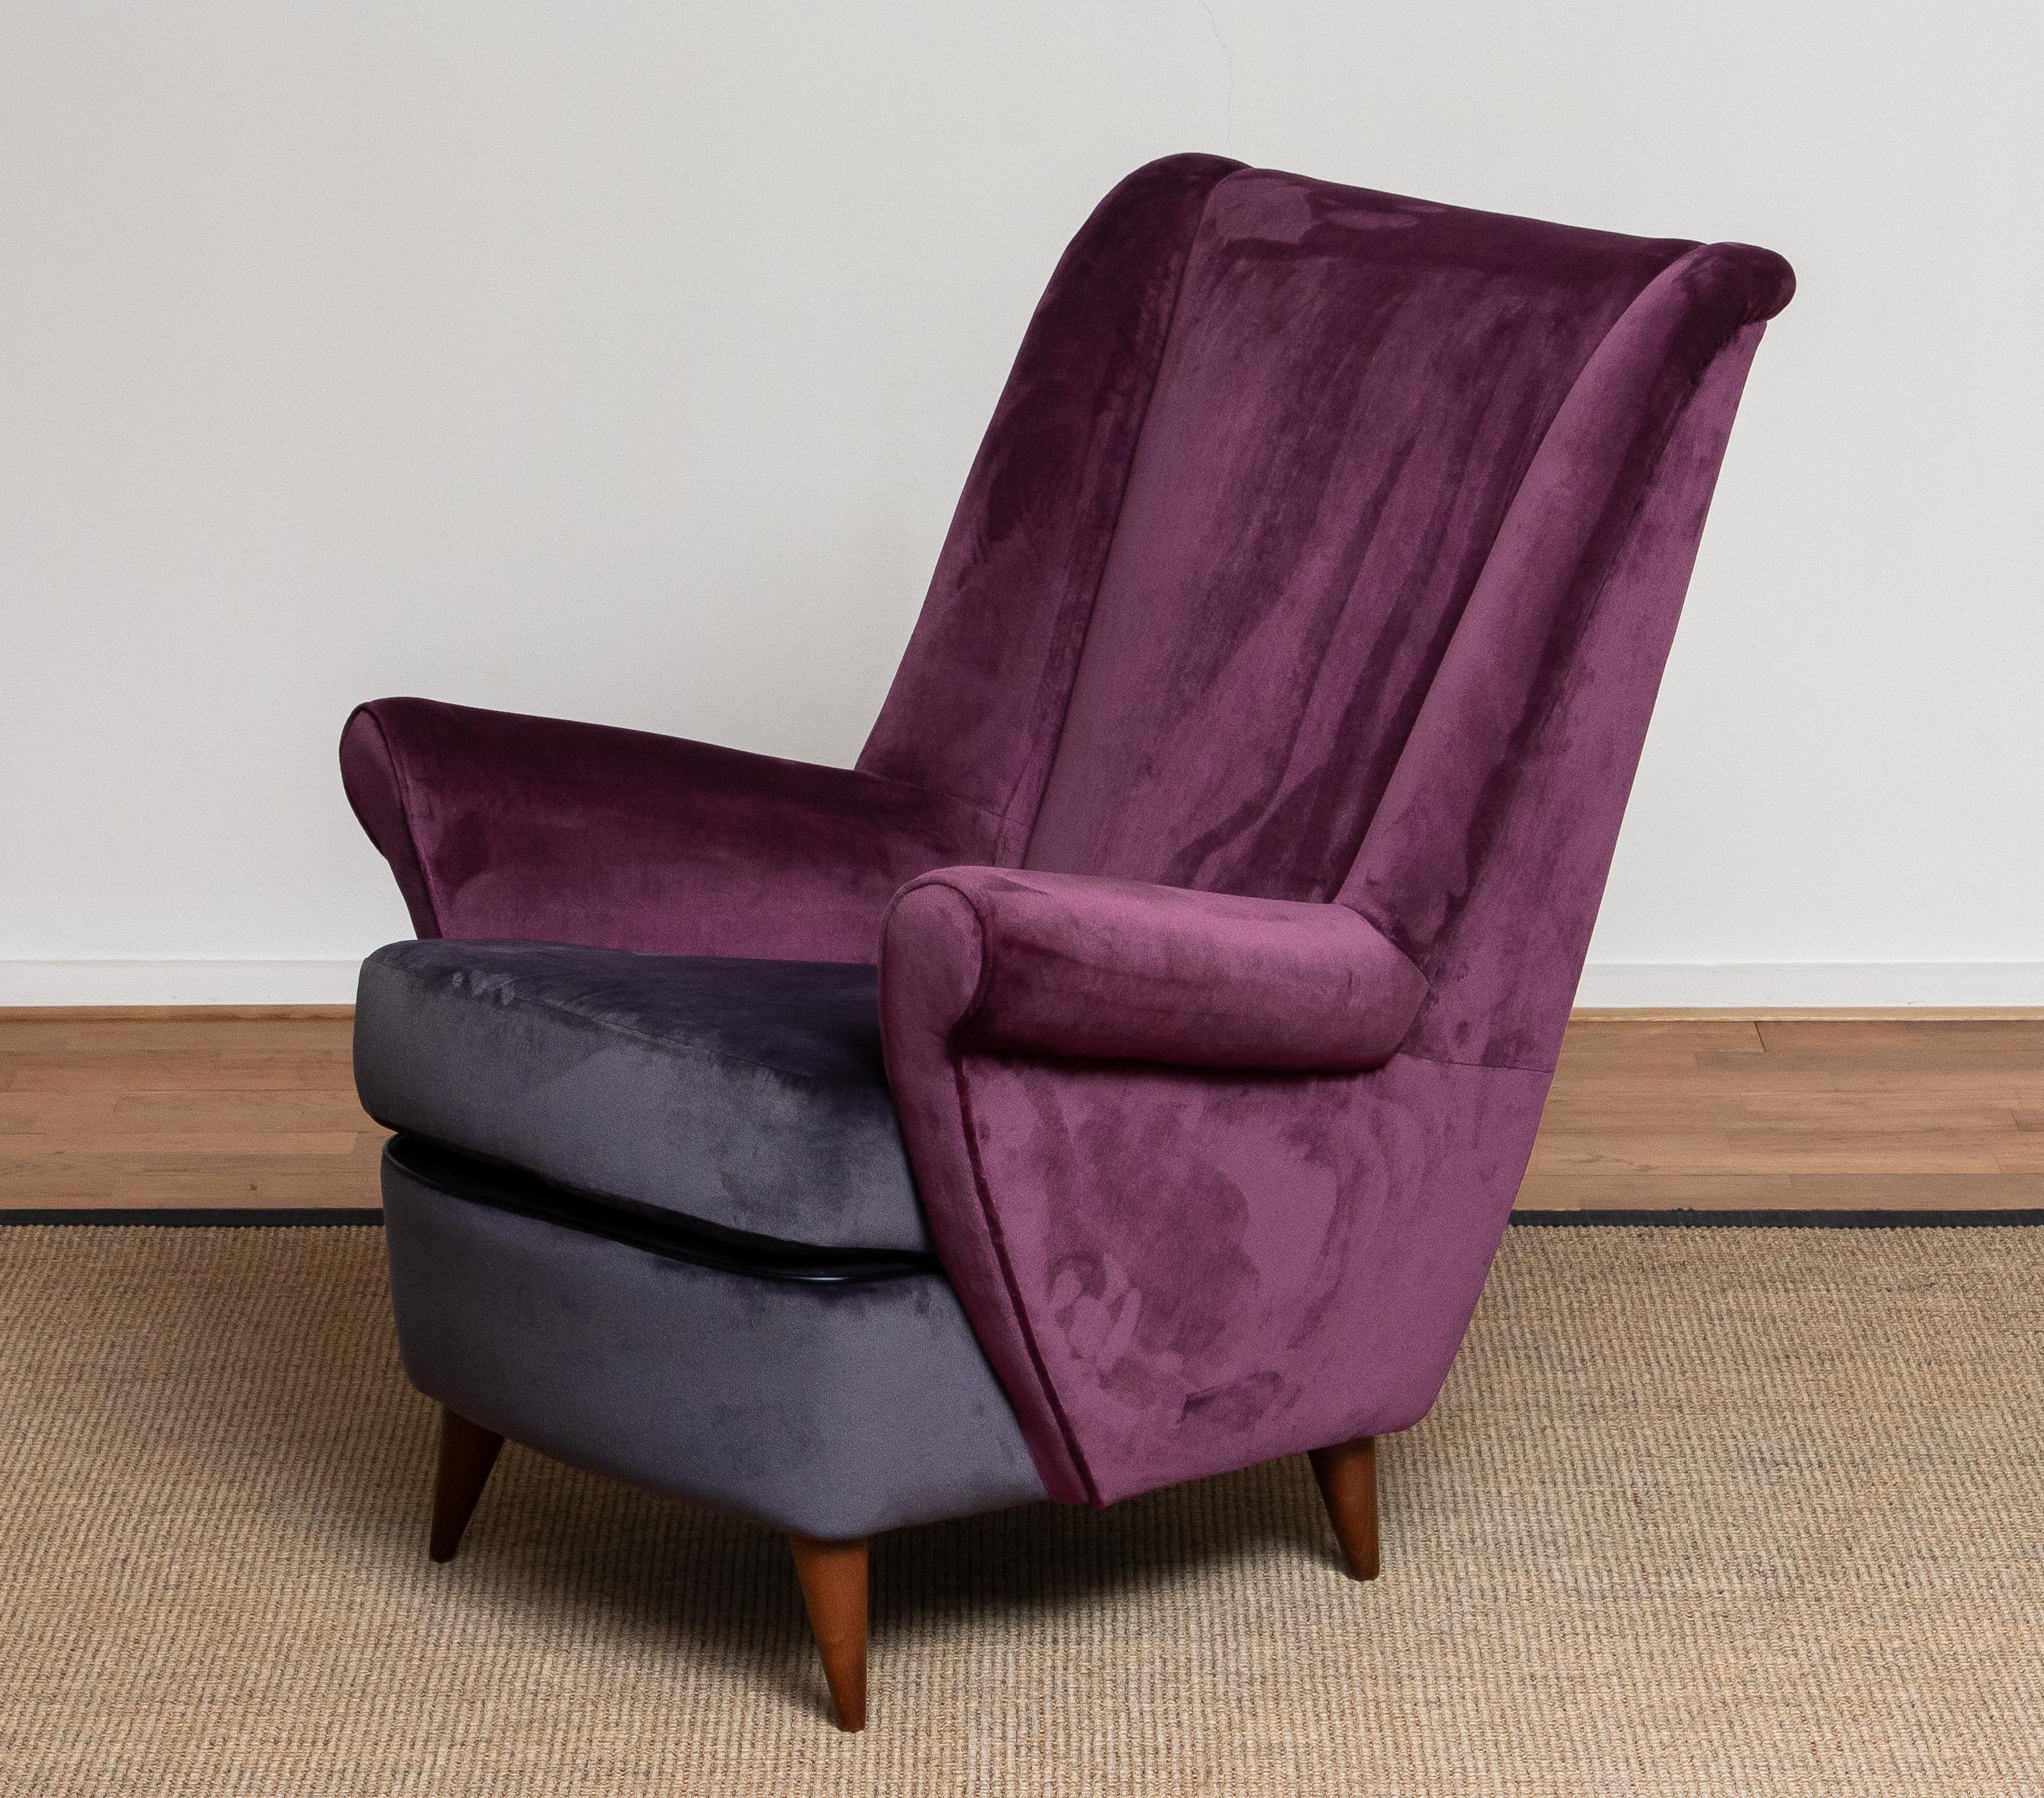 50's Lounge / Easy Chair in Magenta by Designed Gio Ponti for ISA Bergamo, Italy 1